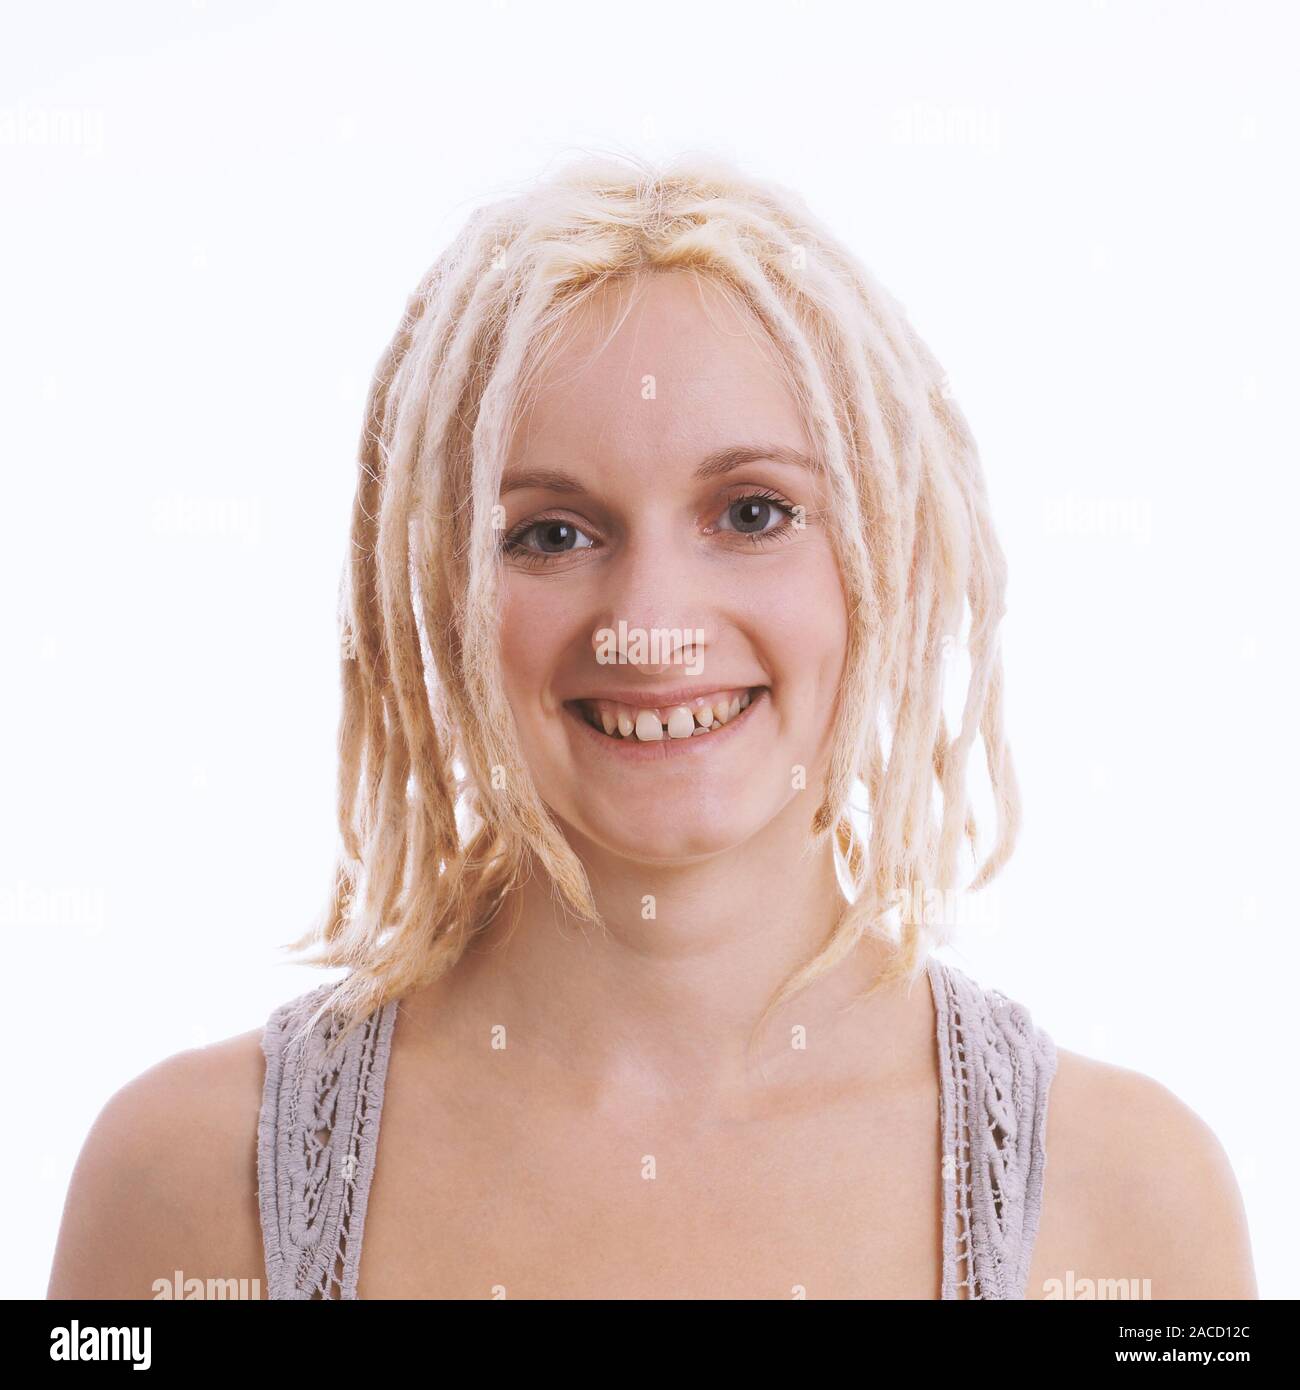 happy smiling young woman with blond dreadlocks and tooth gap - studio headshot against white background Stock Photo